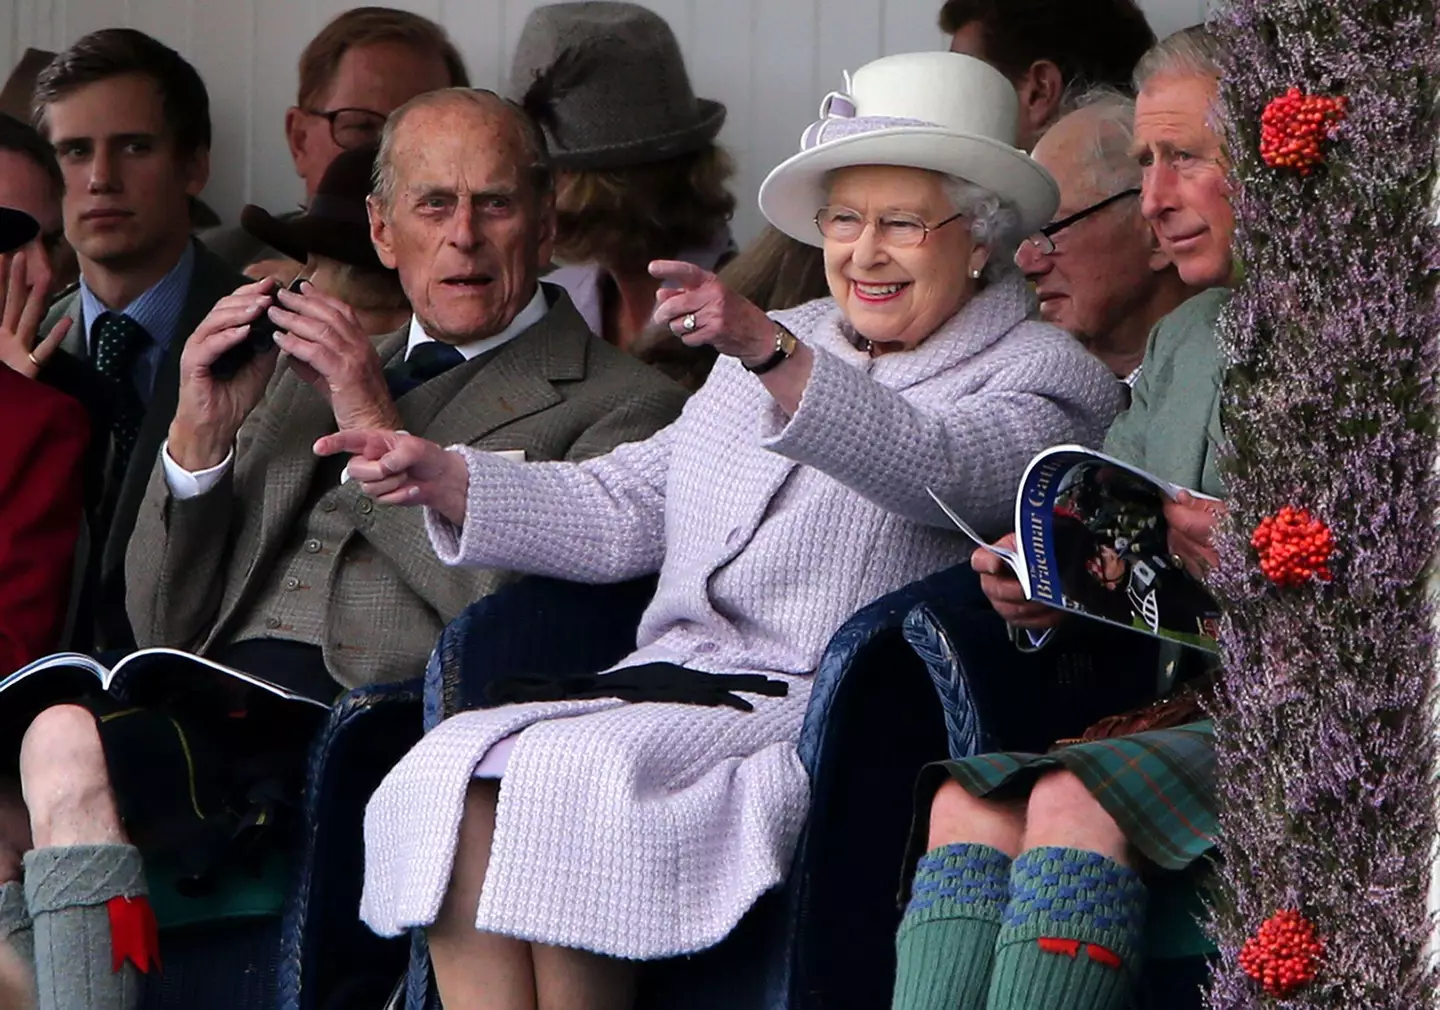 The Queen and Prince Philip in 2012.